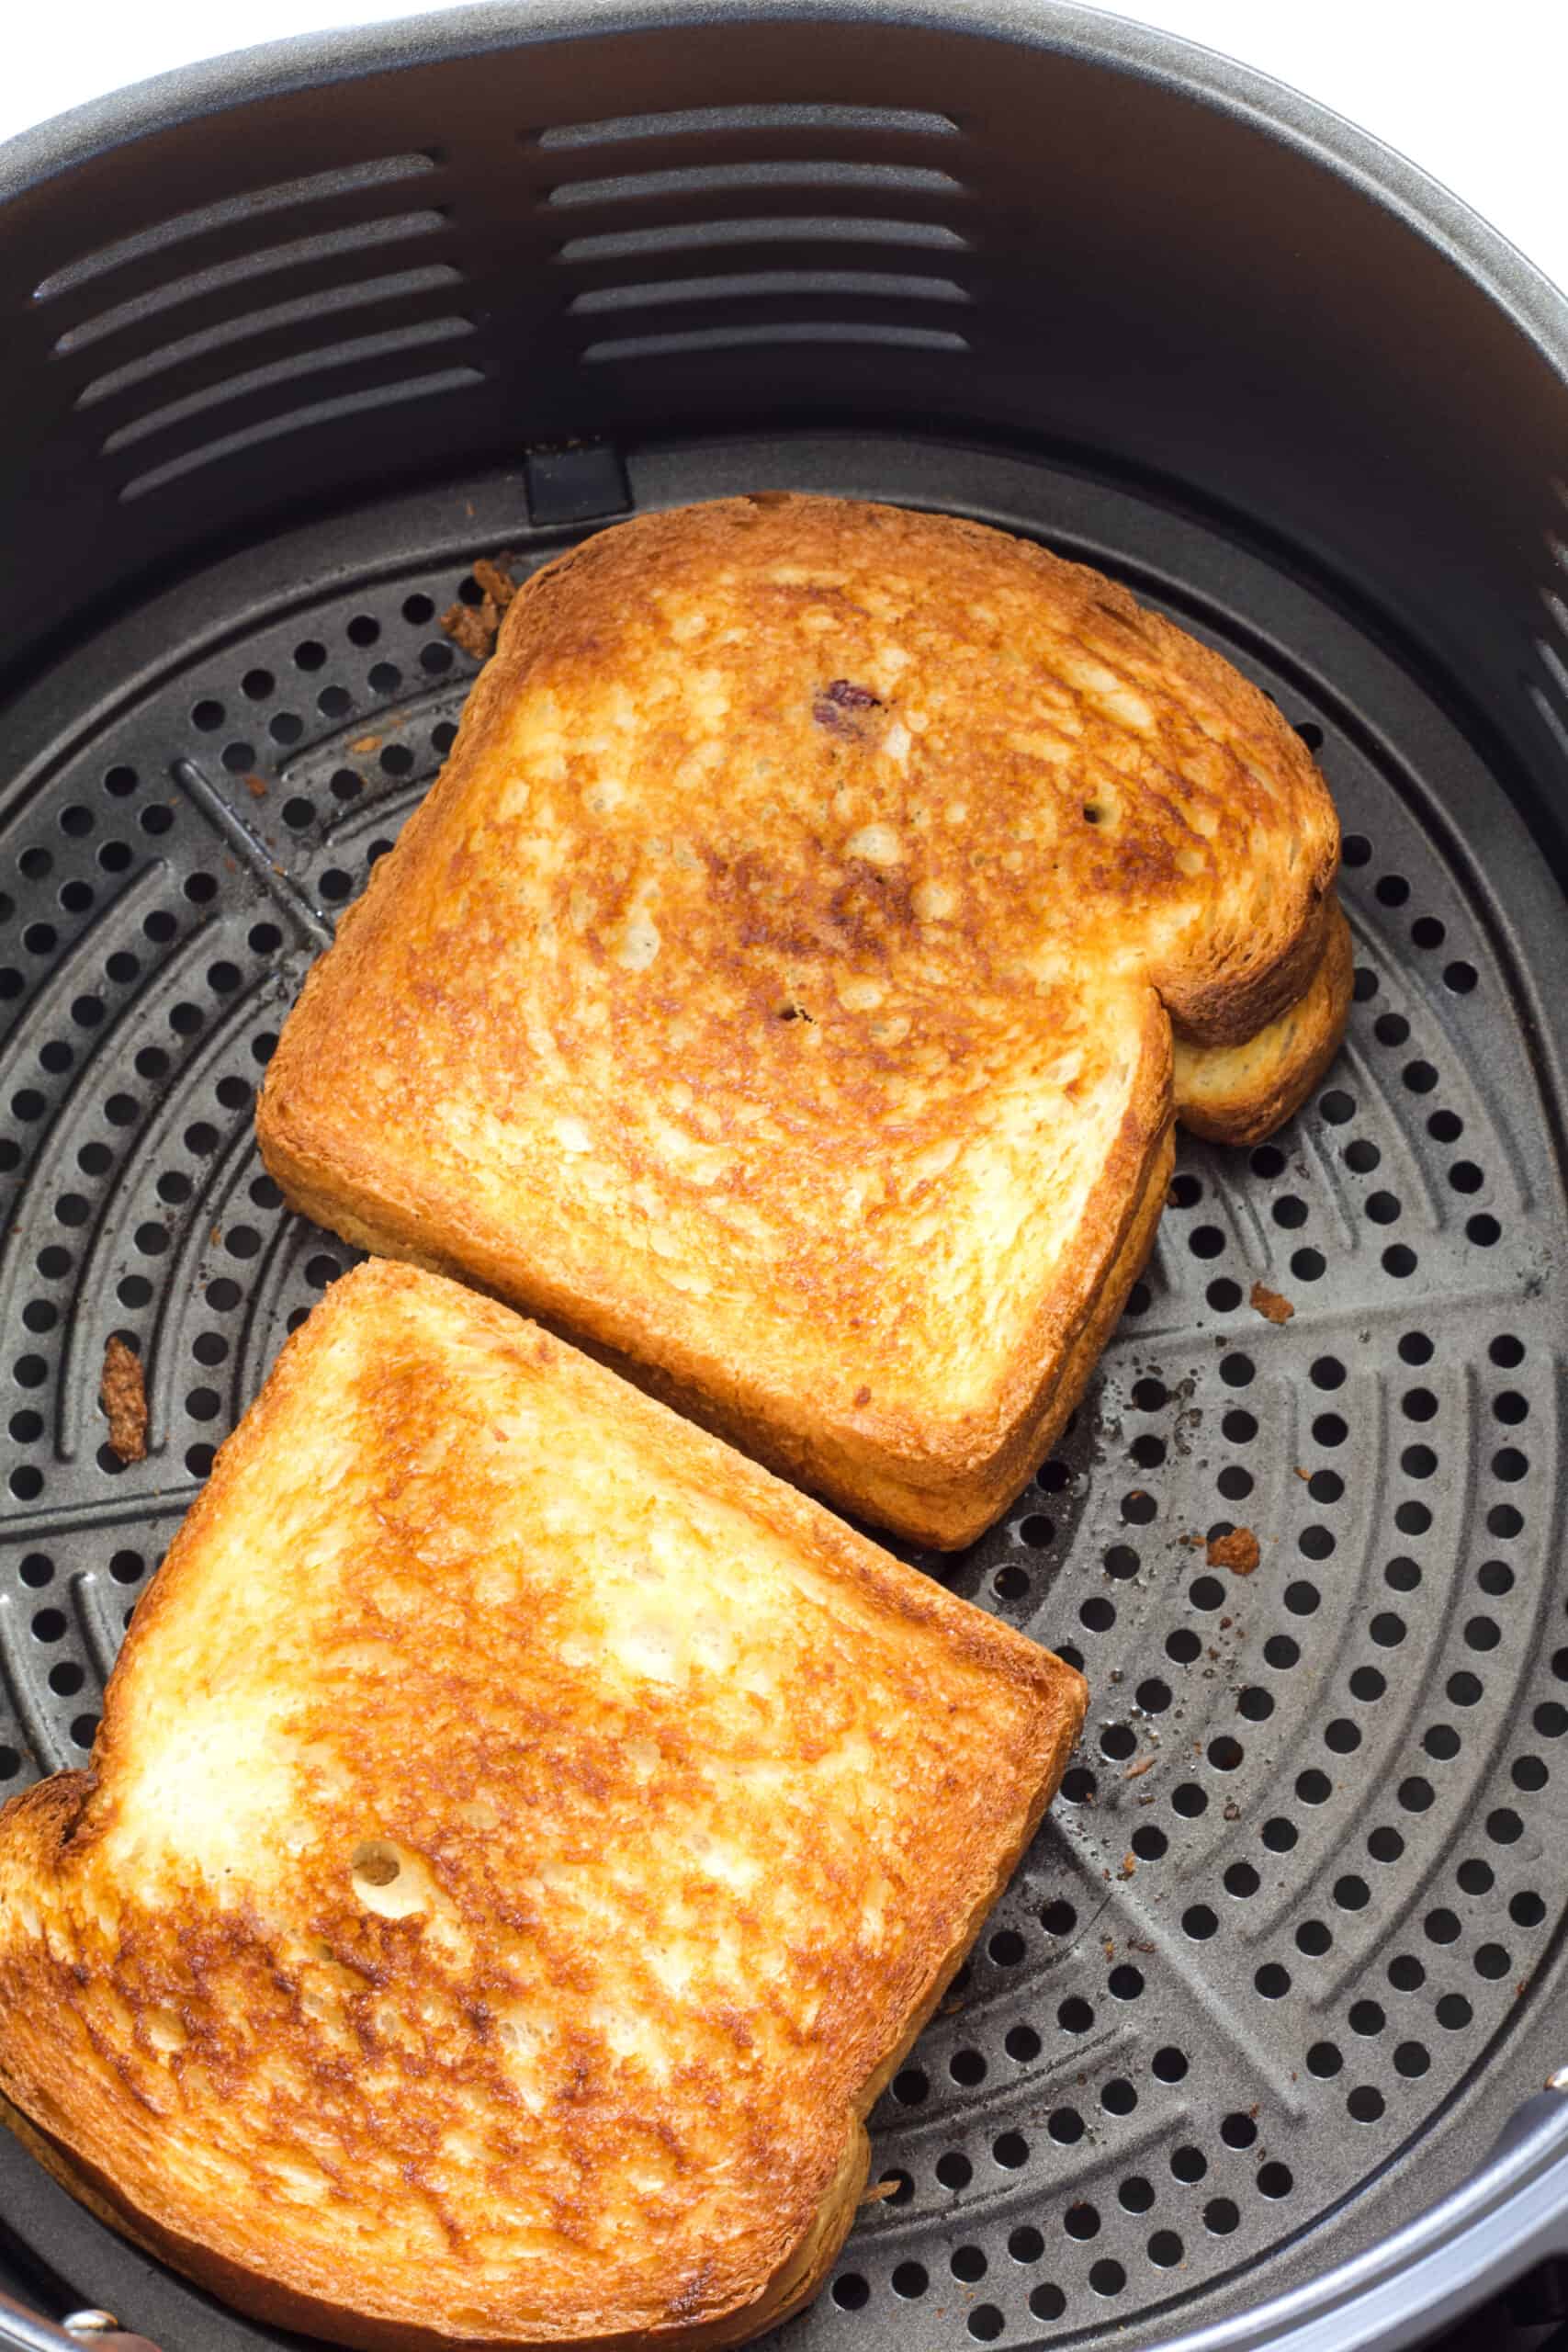 Two whole peanut butter and jelly sandwiches in the air fryer basket that have been air fried.